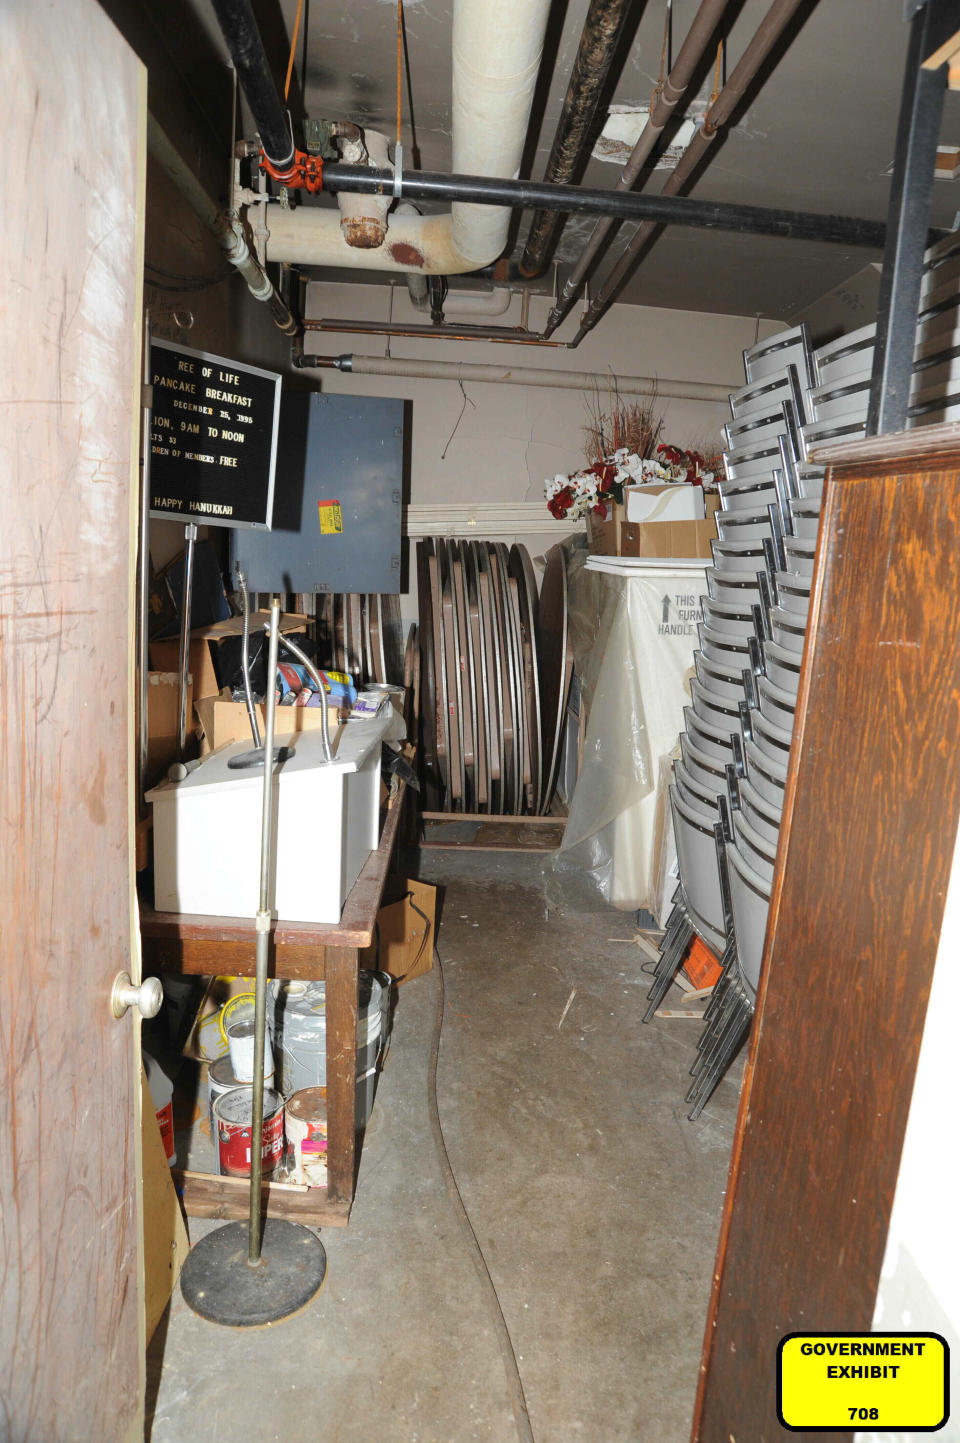 This photo of a storeroom in the Tree of Life synagogue building in Pittsburgh was entered May 31, 2023, as a court exhibit by prosecutors in the federal trial of Robert Bowers. He faces multiple charges in the killing of 11 worshippers from three congregations and the wounding of seven worshippers and police officers in the building on Oct. 27, 2018. New Light Congregation members Carol Black and Barry Werber sheltered in this closet for what "felt like a year" before police rescued them, Black testified. Three of the victims were members of New Light -- Dan Stein, Melvin Wax and Black's brother, Richard Gottfried. The charges include the obstruction of the free exercise of religion, resulting in death. (U.S. District Court for the Western District of Pennsylvania via AP)